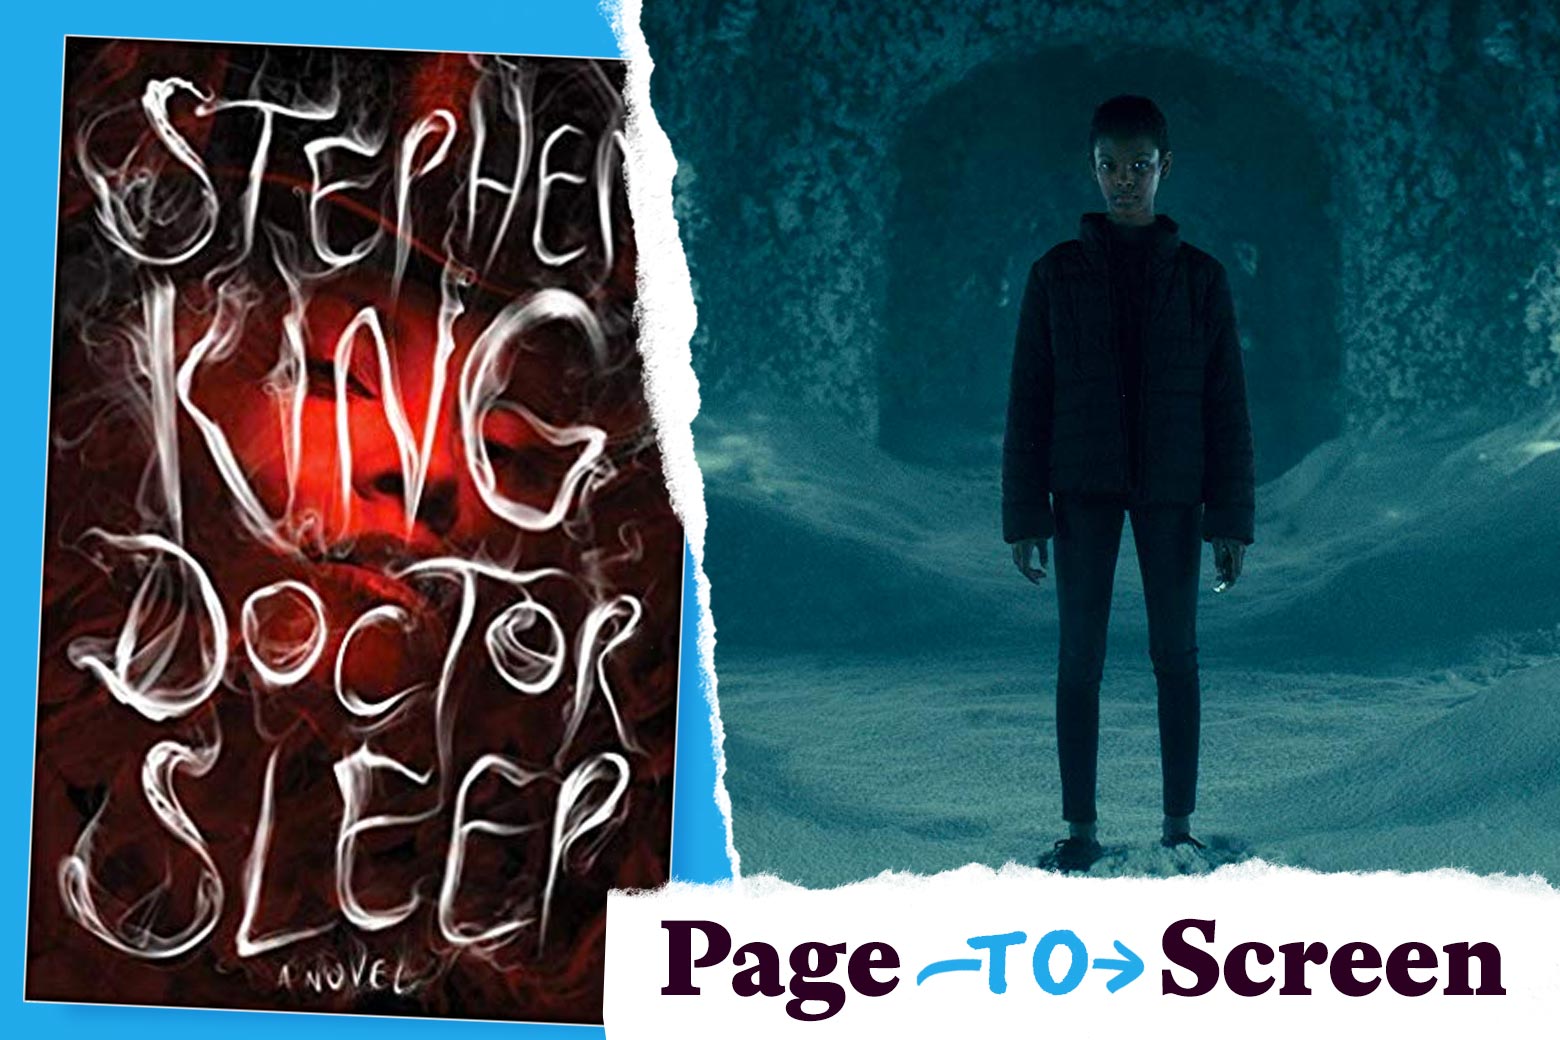 The cover of the book Doctor Sleep, and a still from its movie adaptation